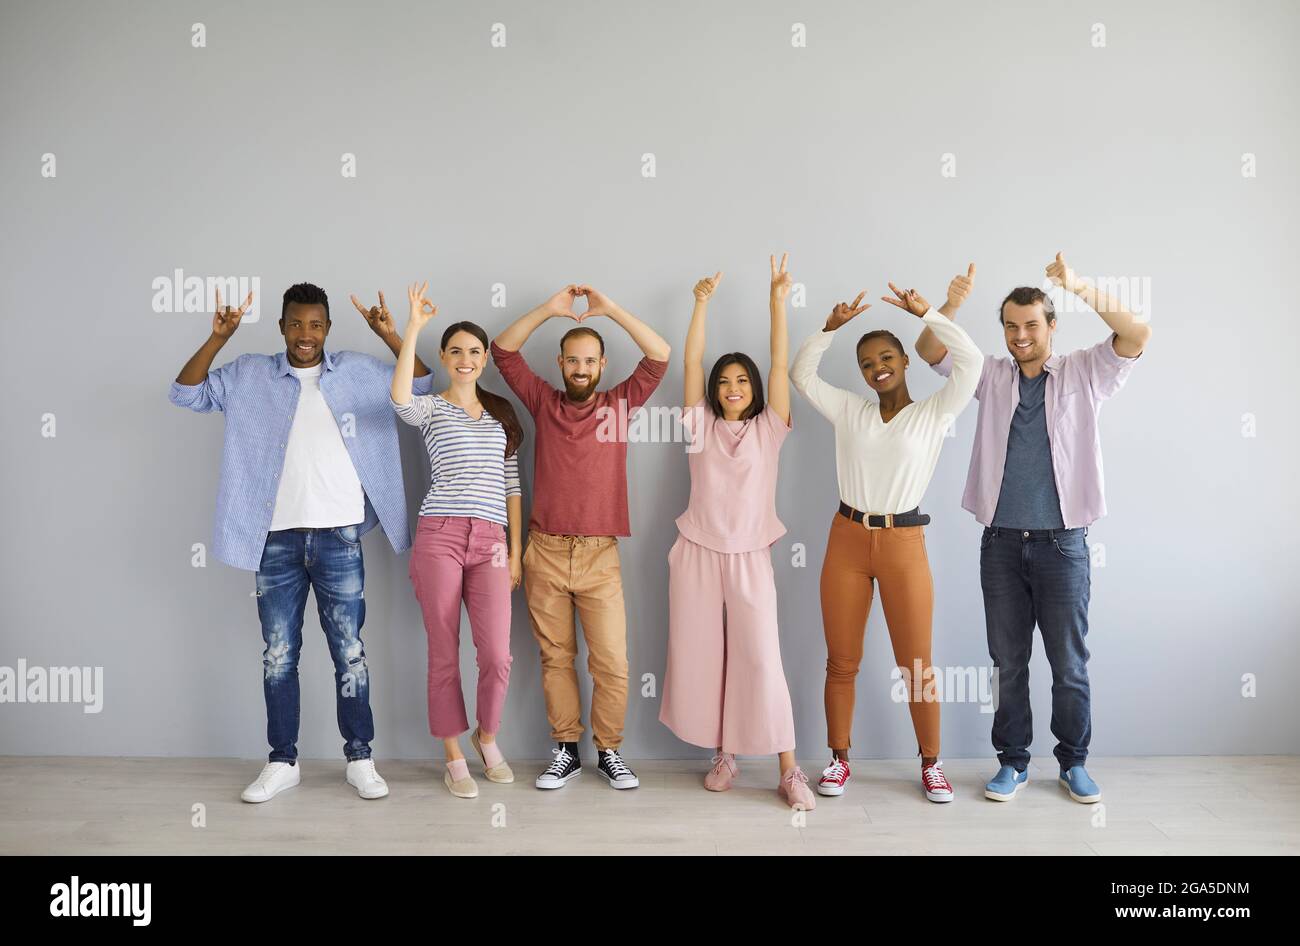 Group of happy multiracial people showing positive hand gestures like OK, thumbs up, etc Stock Photo